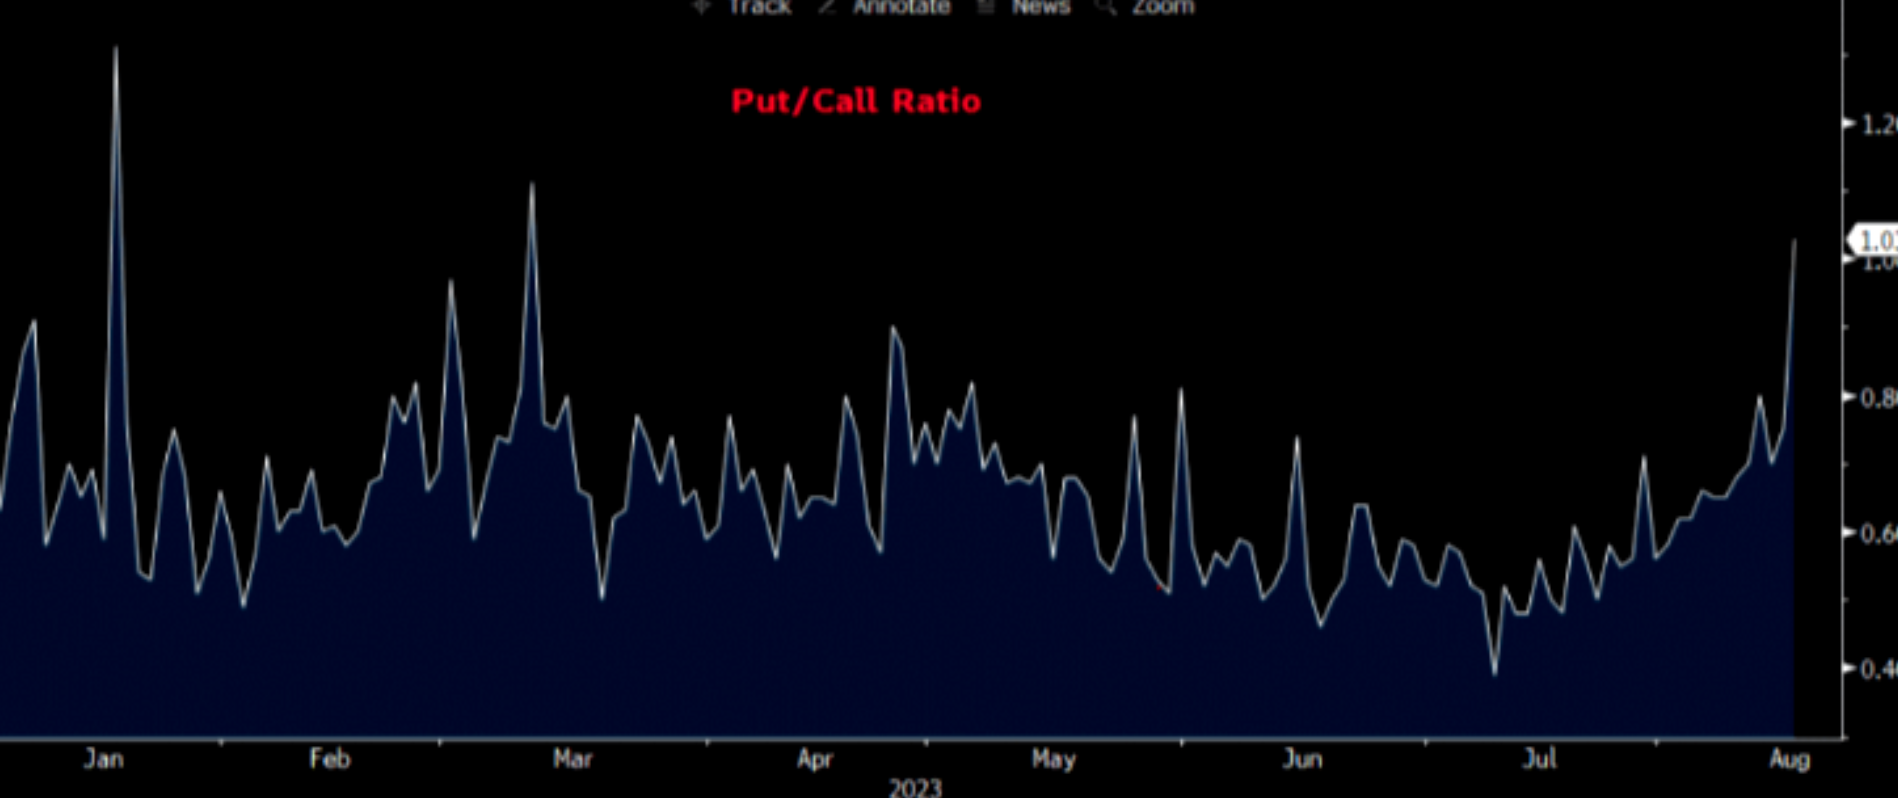 LONGWave-08-09-23-AUGUST-The-Inflation-Fighter-Volcker-v-Powell-Newsletter-3-Put-Call-Ratio image